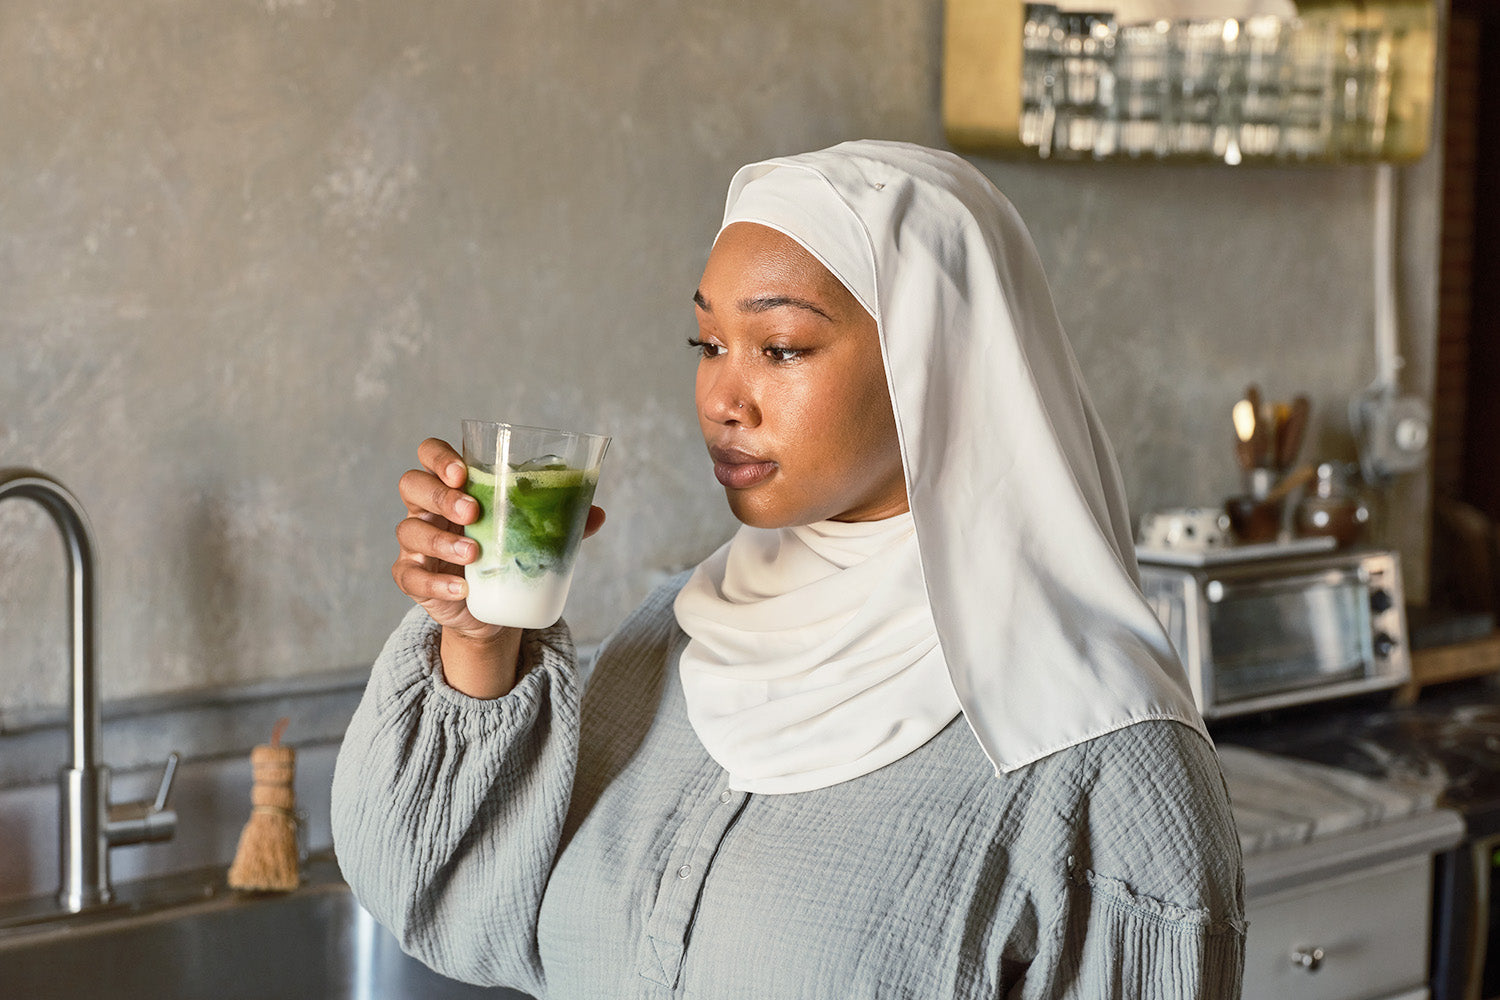 A woman pauses before taking a sip of an iced matcha latte in one of Cuzen's Perfect Matcha Latte Glasses.